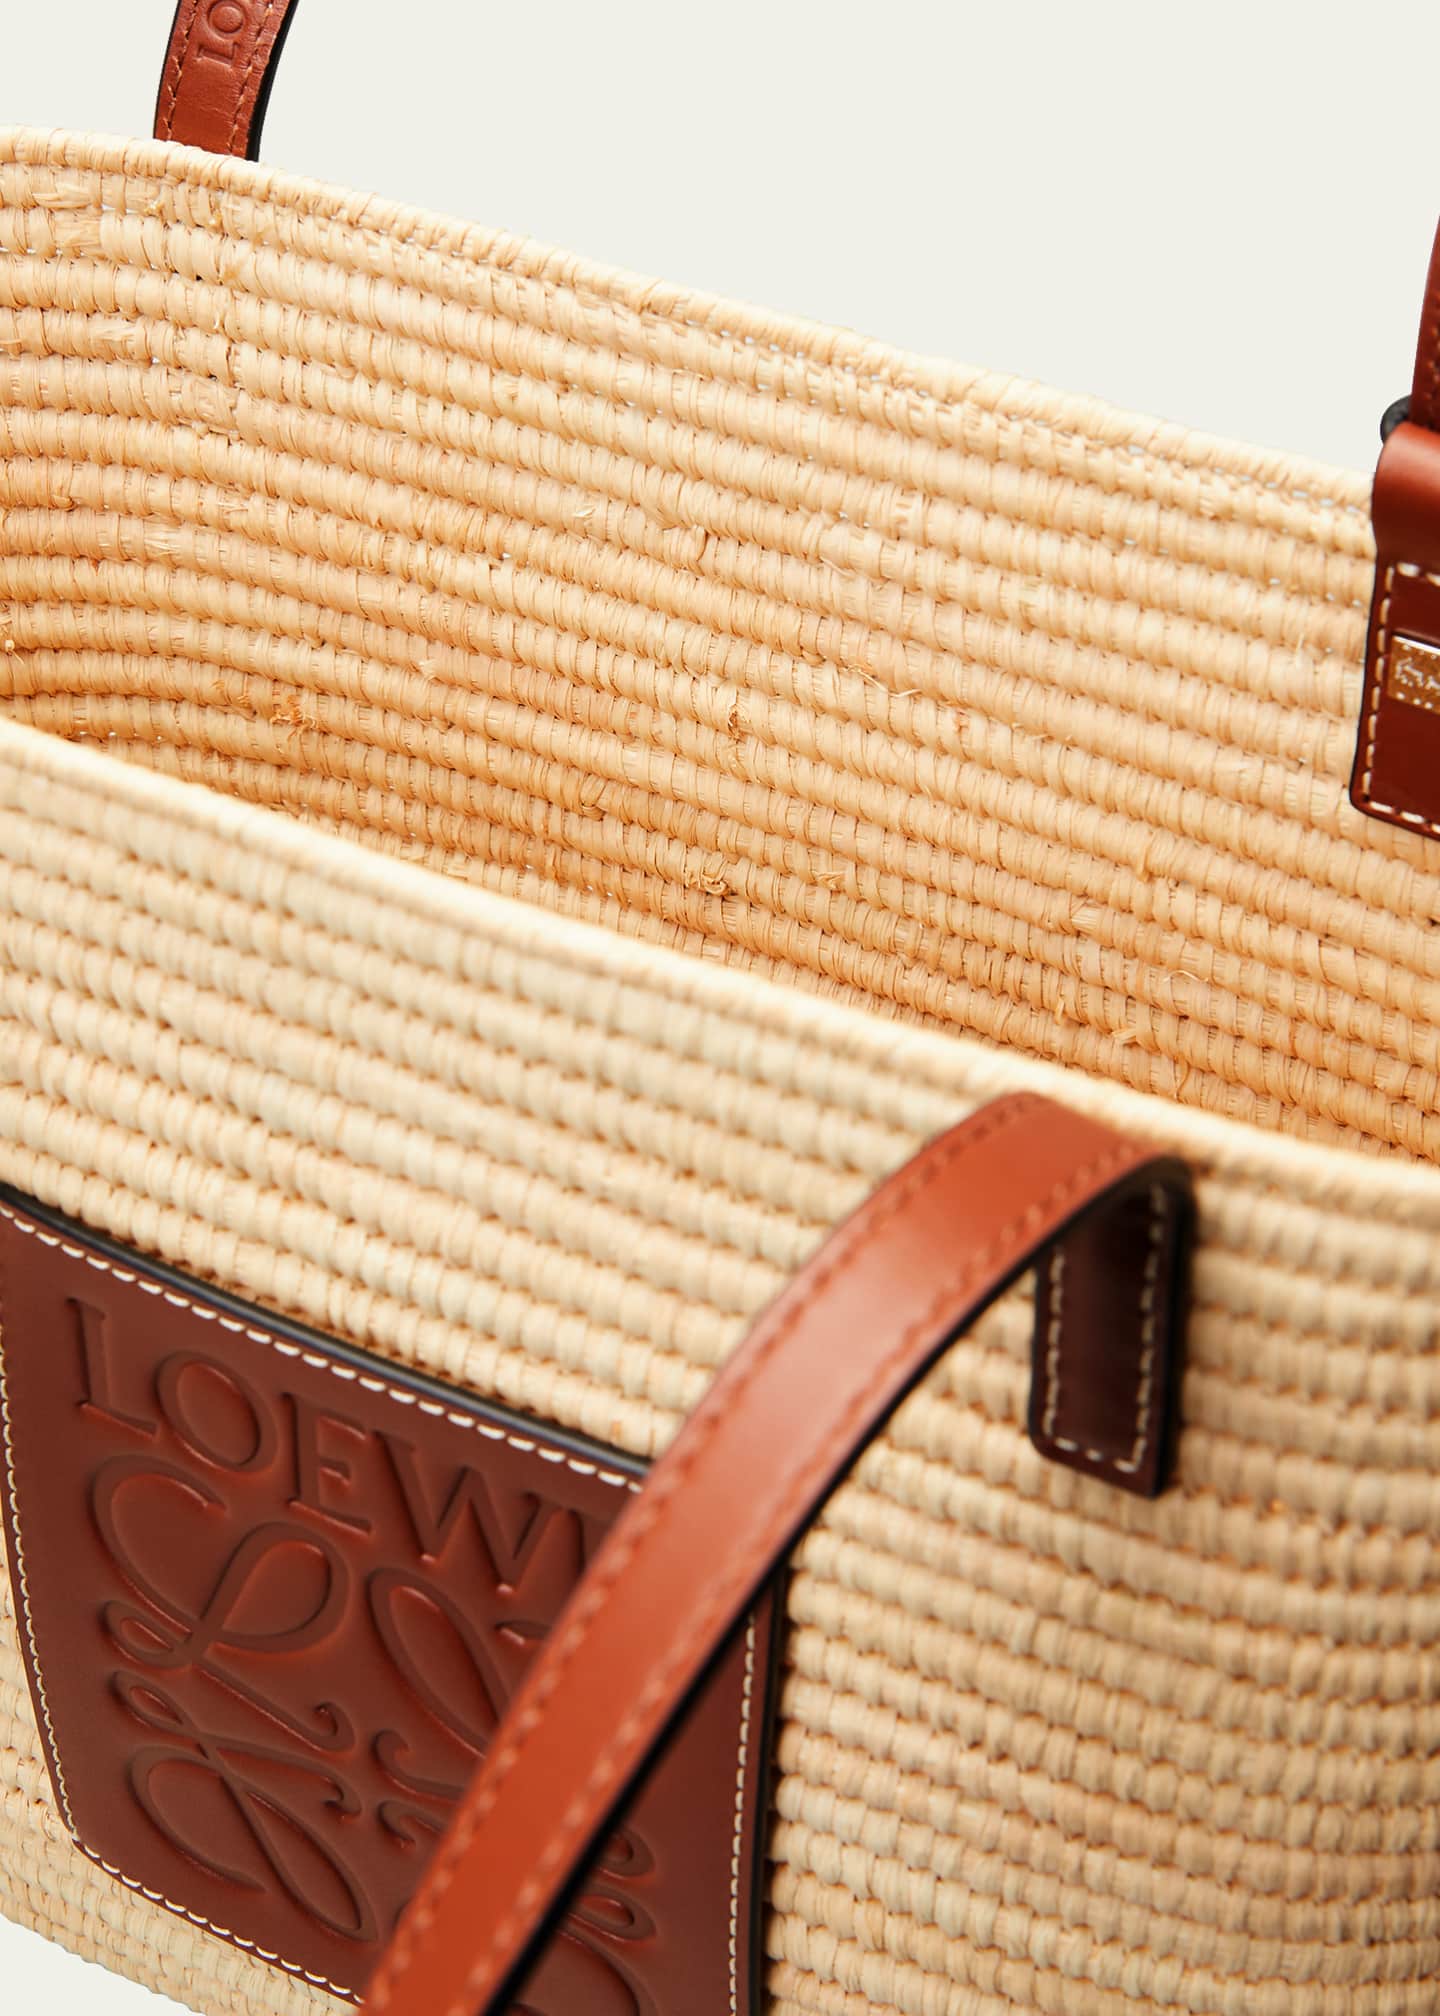 Loewe x Paula's Ibiza Square Basket Small Bag in Raffia with Leather Handles Image 4 of 5